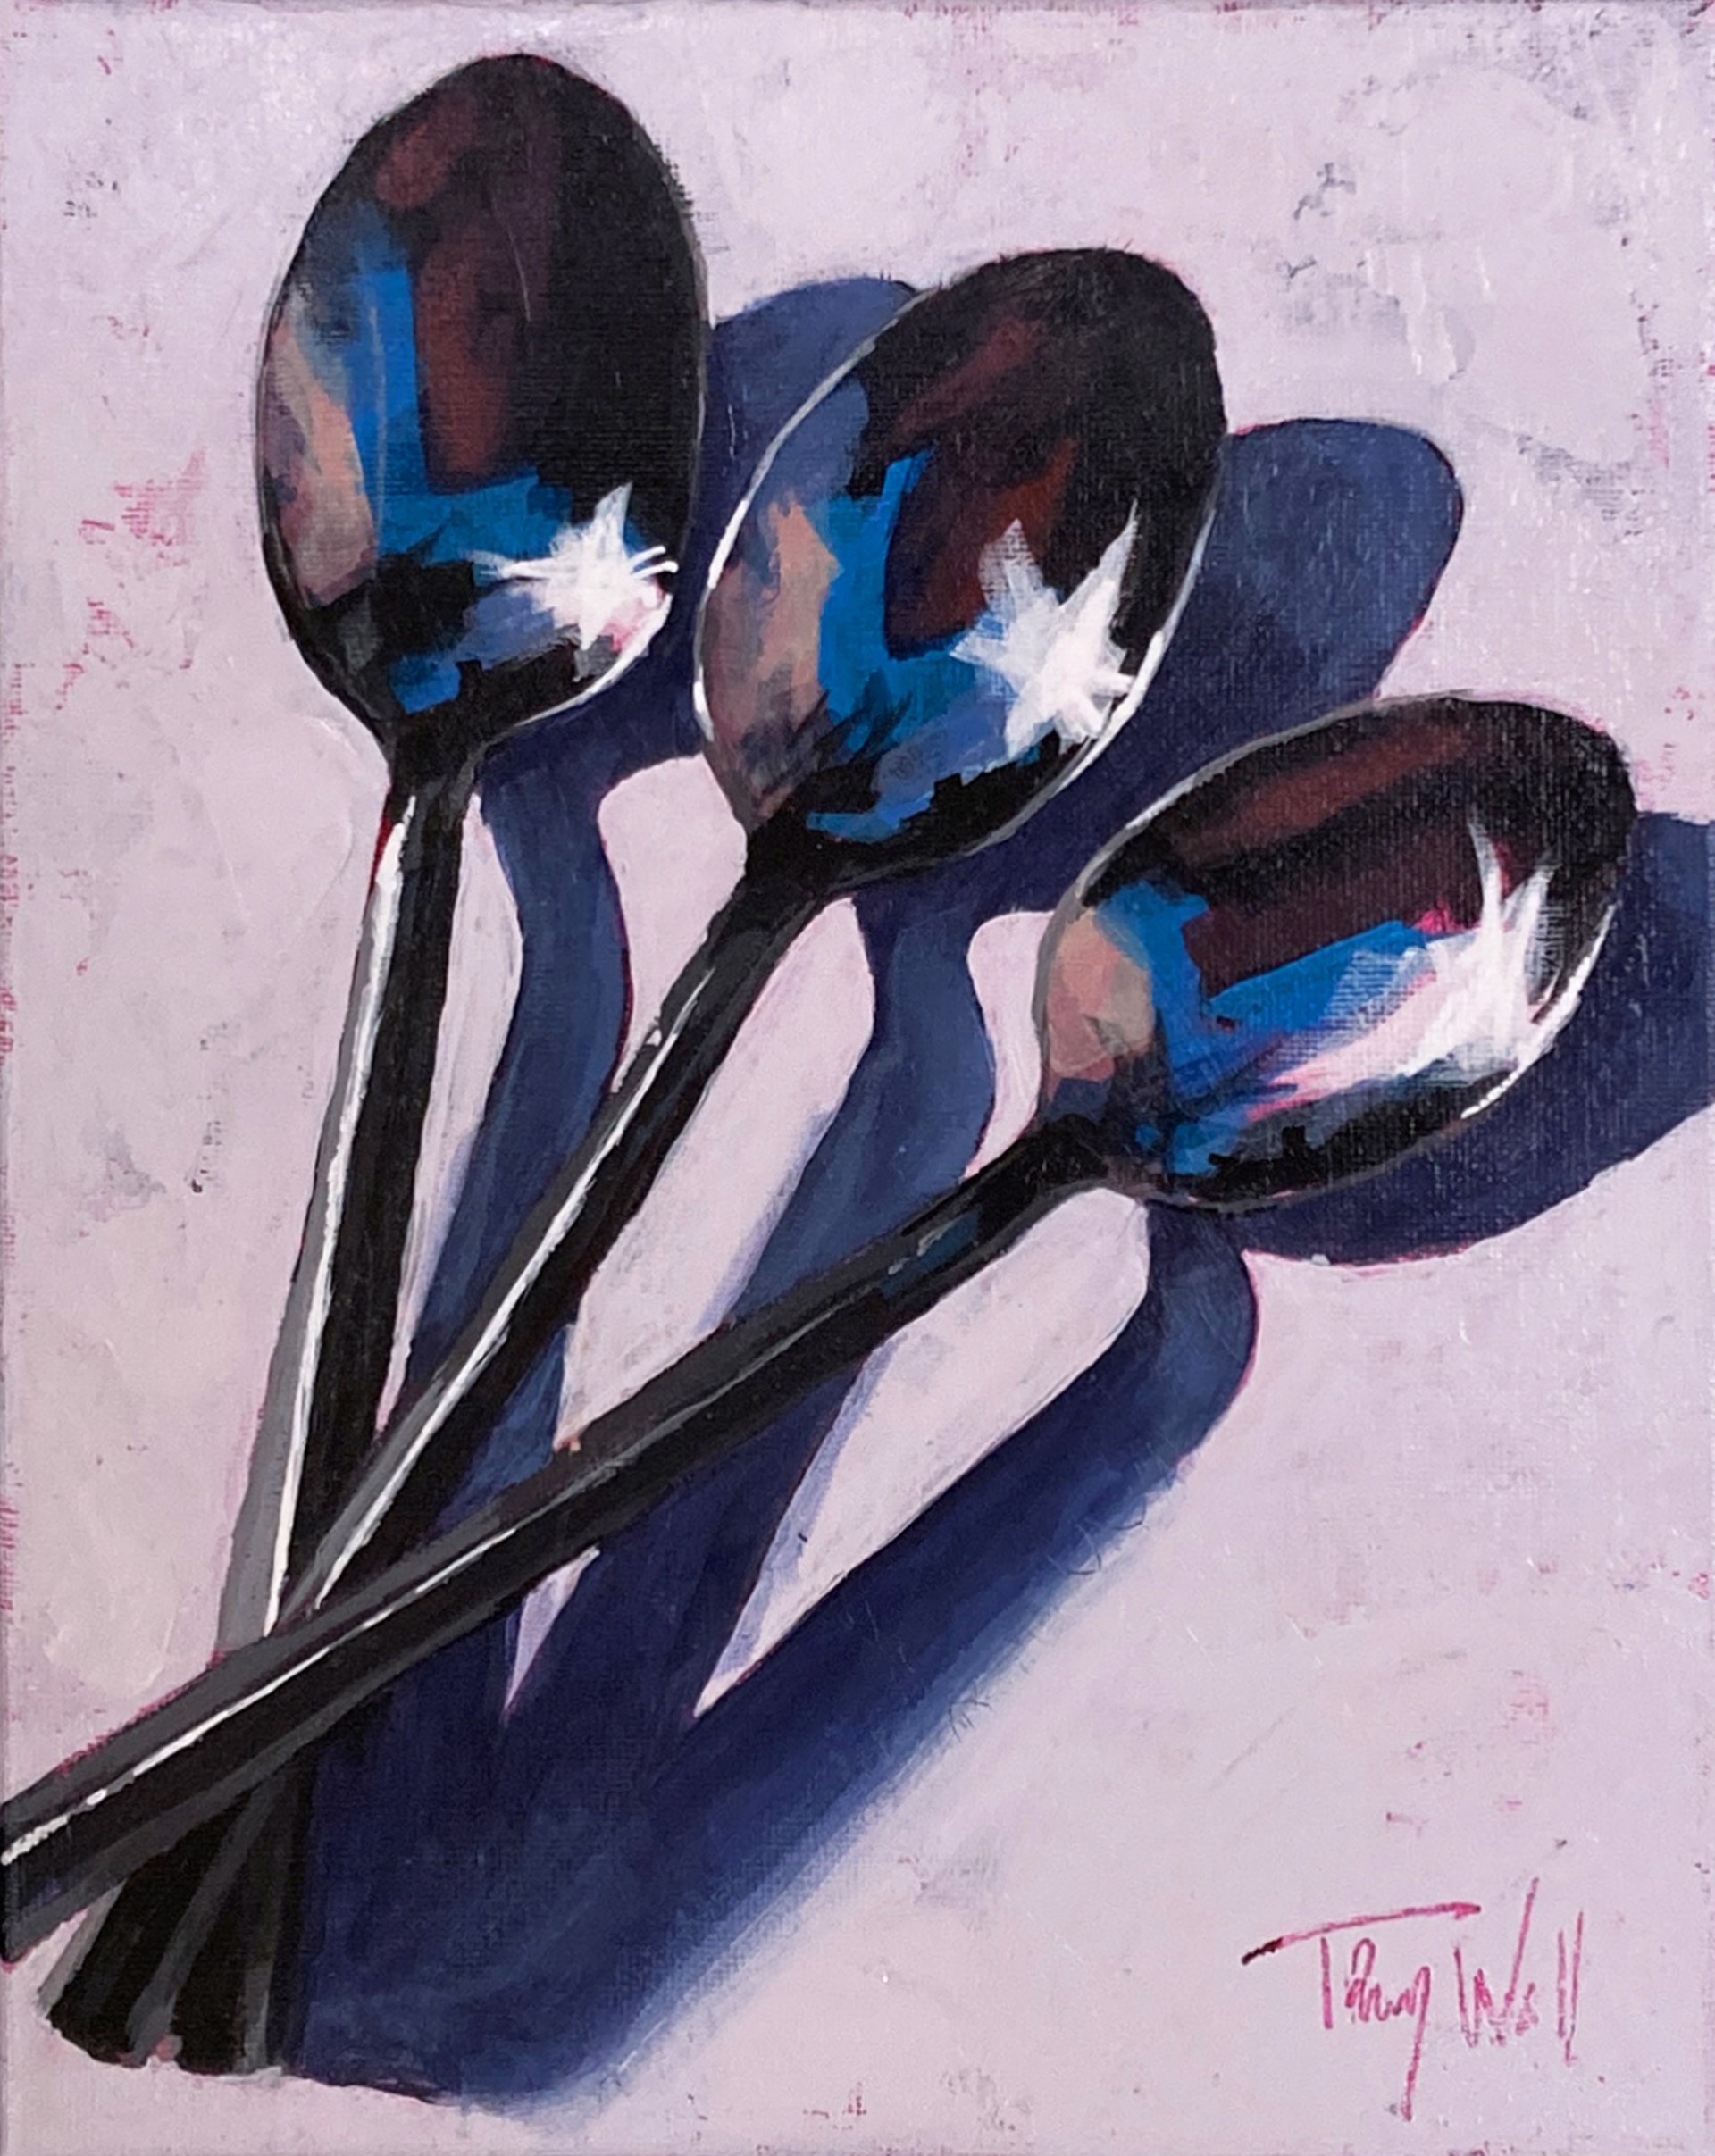 3 Spoons by Tracy Wall